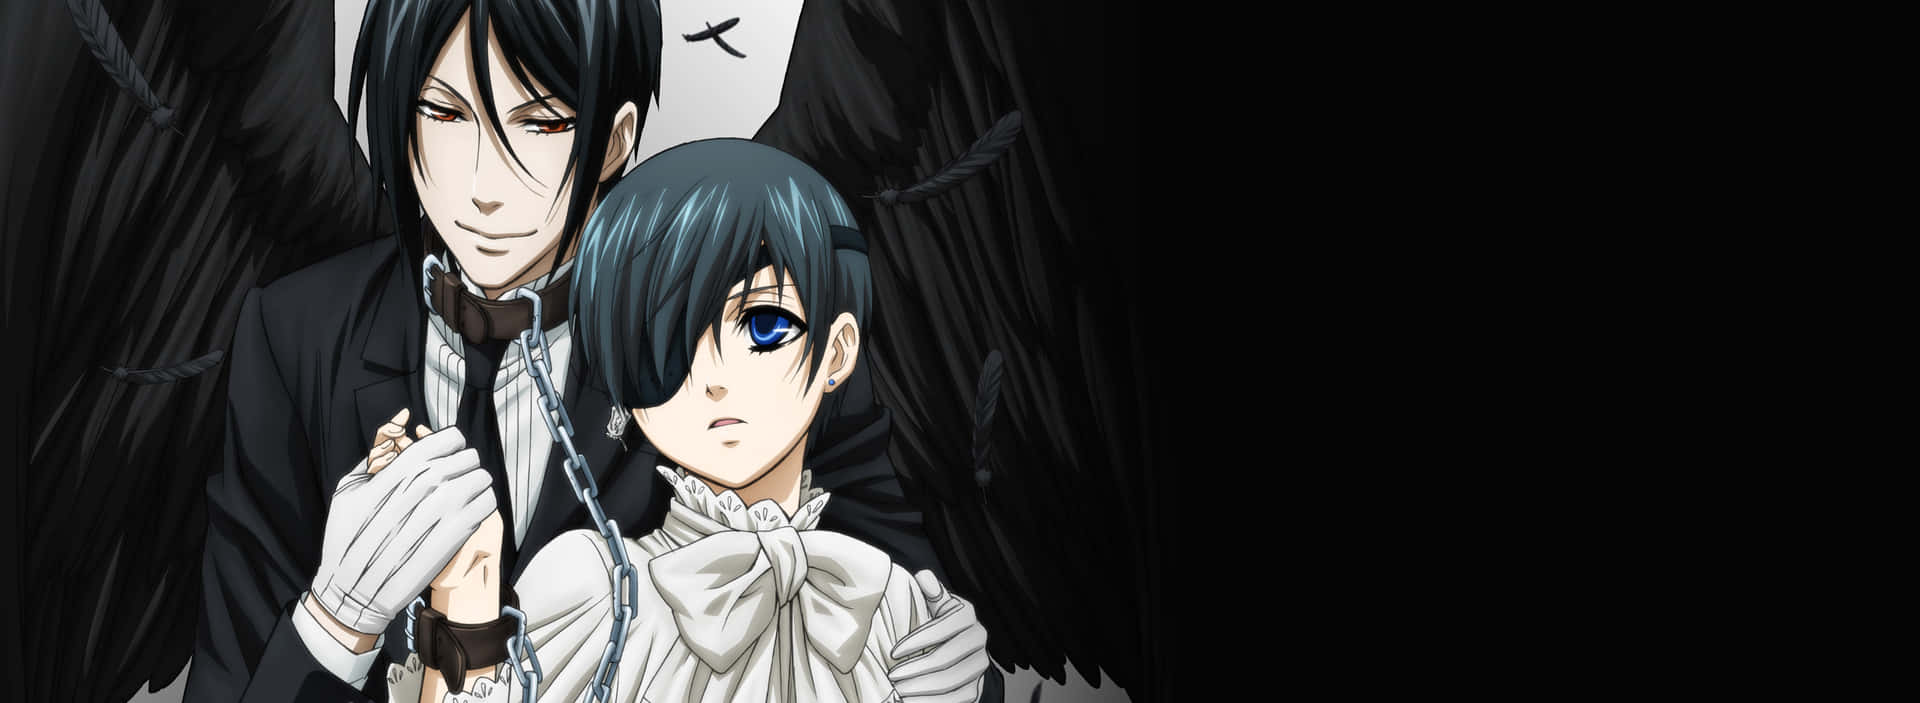 Ciel Phantomhive, The Aristocratic Young Earl